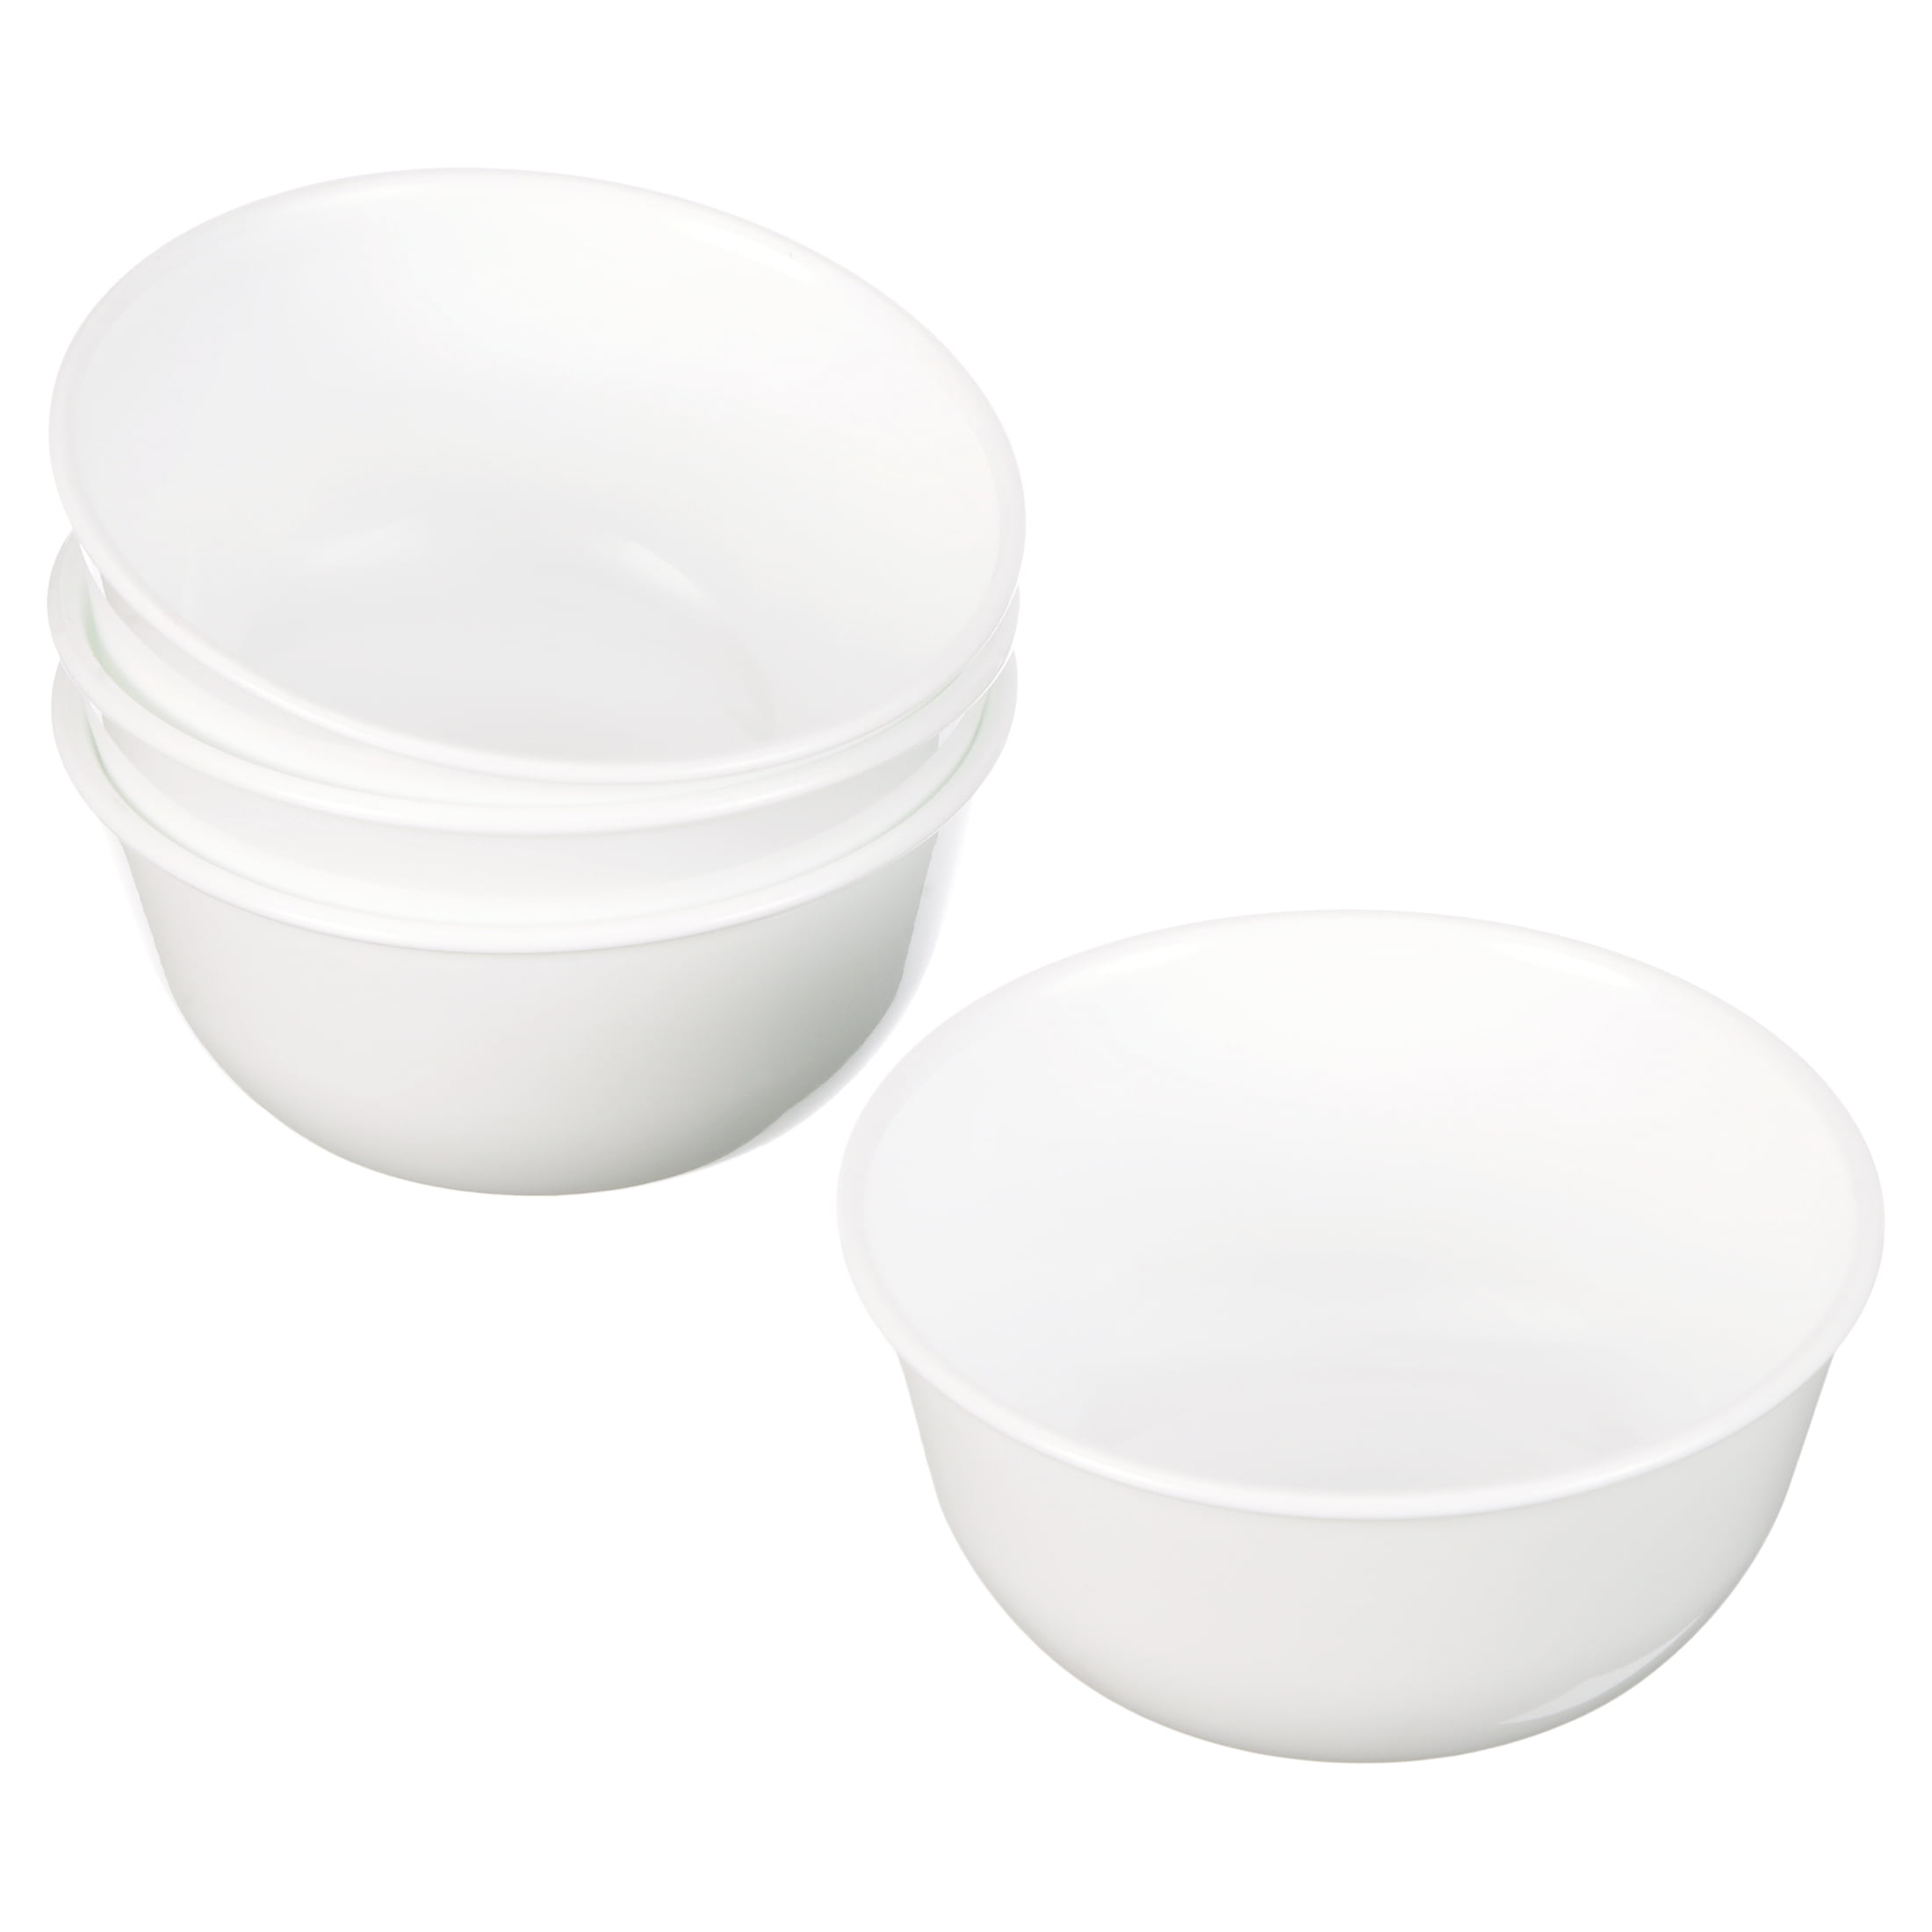 wound Extremely important To accelerate Corelle Classic Winter Frost White, Snack Bowl Set, 5 Pieces - Walmart.com